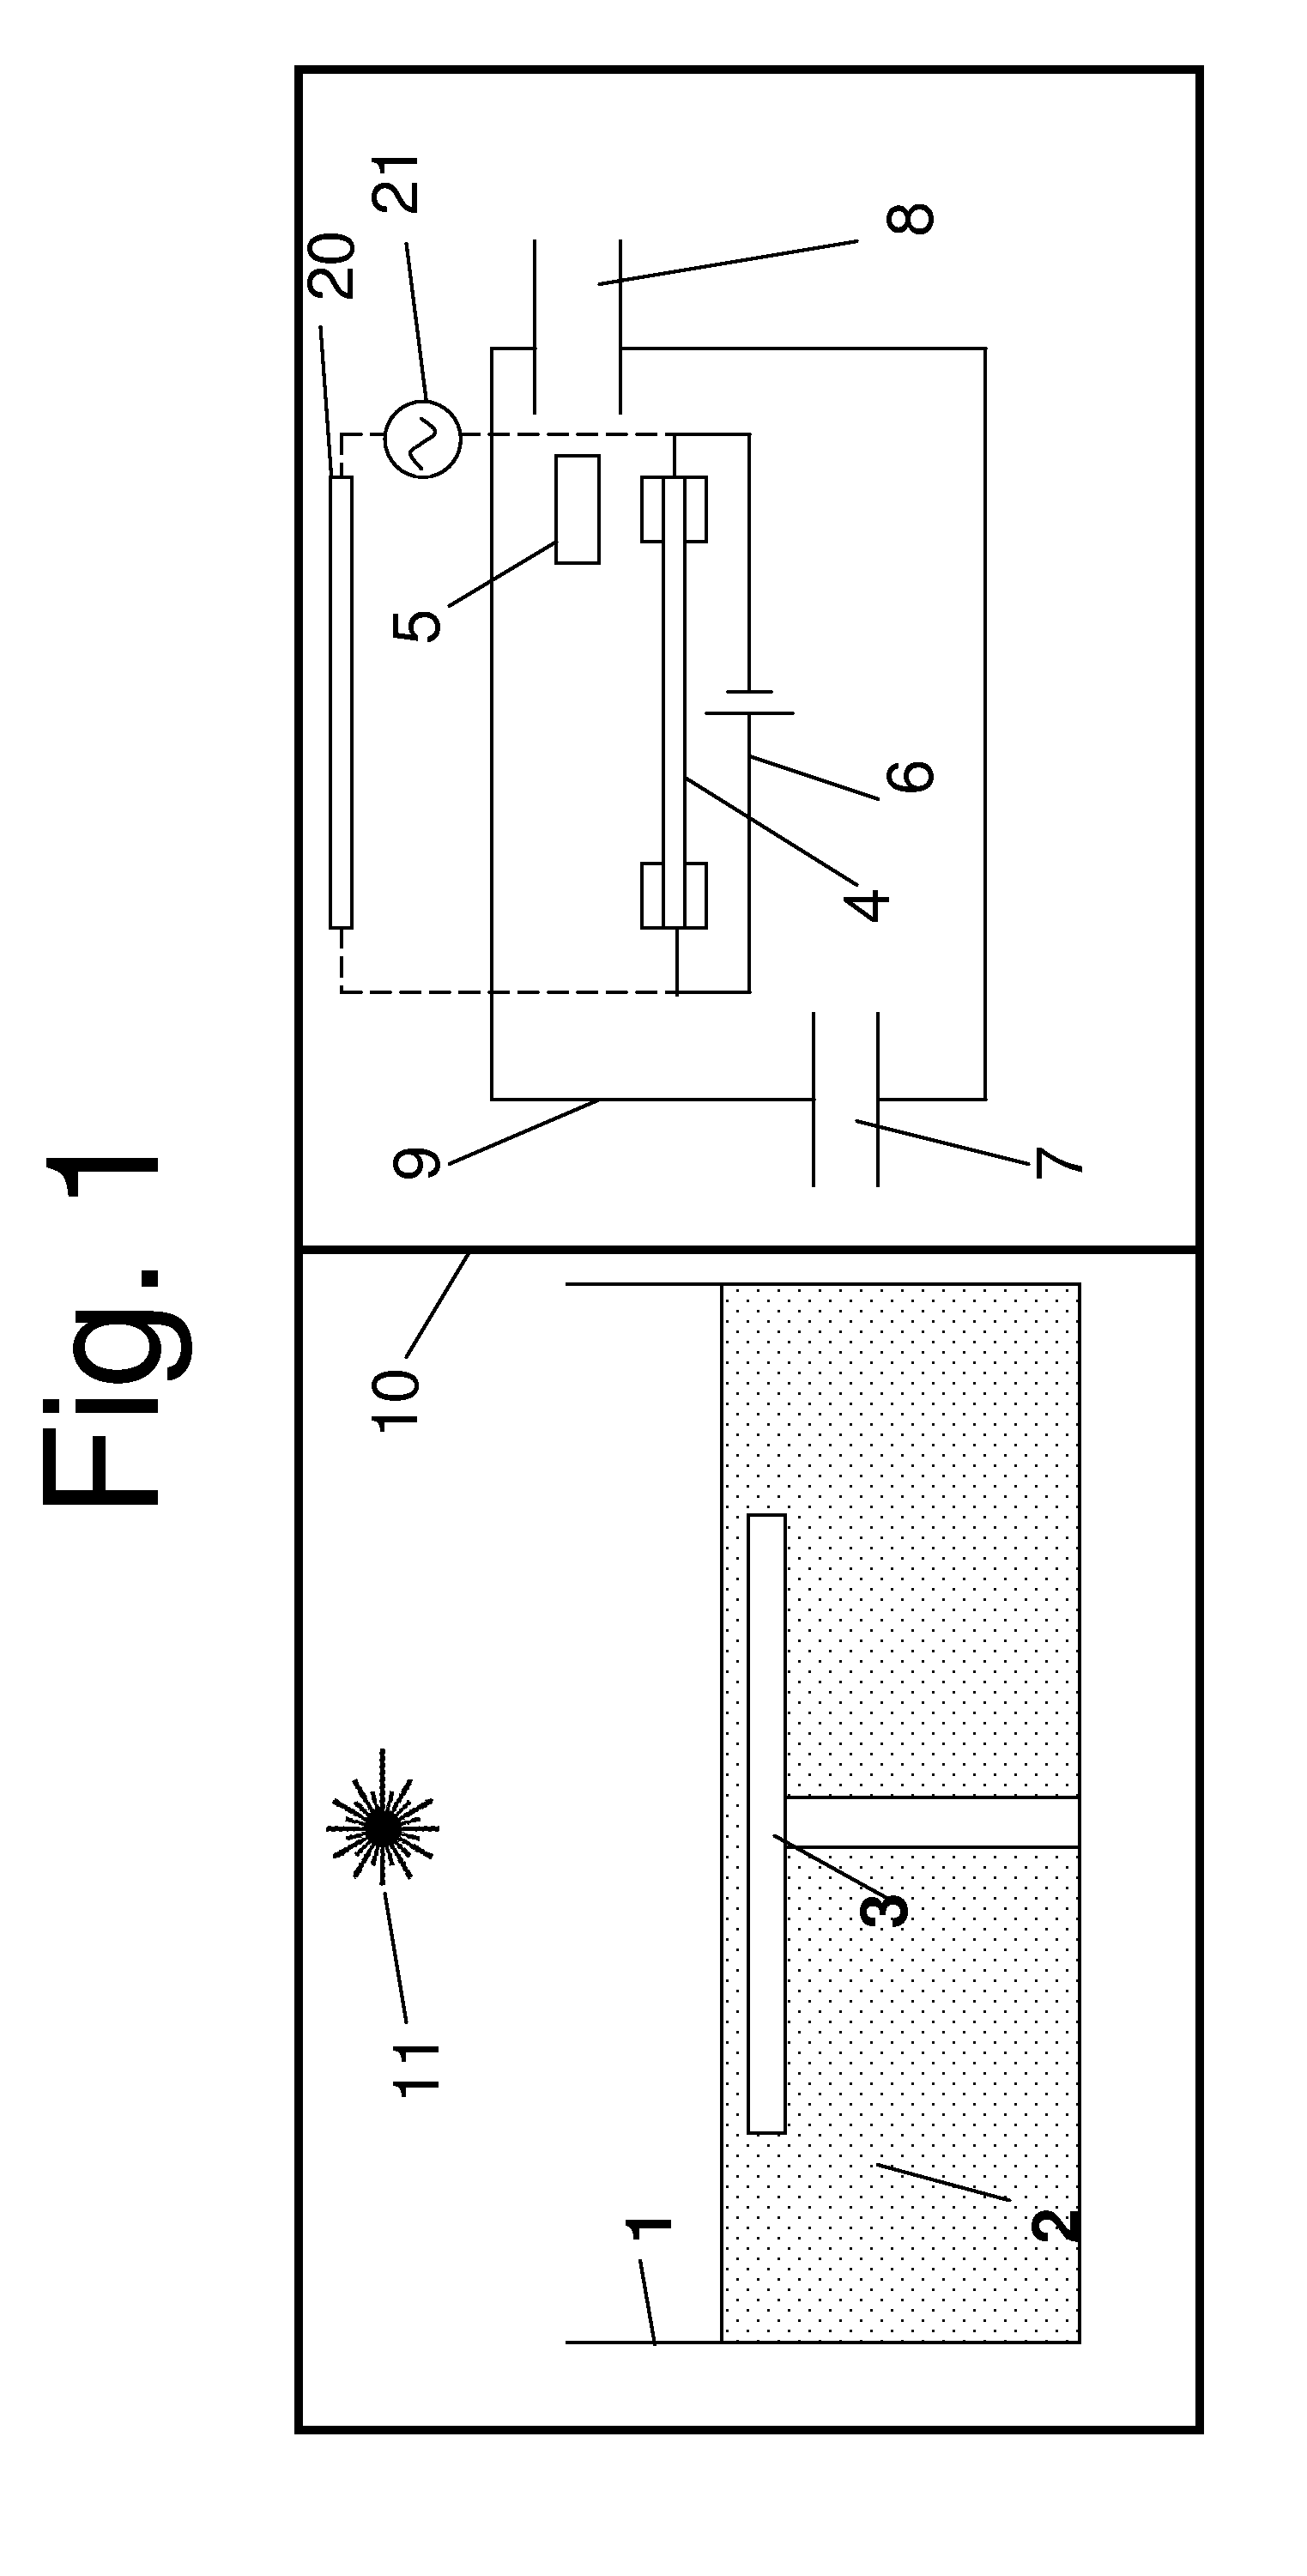 Method and apparatus for manufacturing a composite material